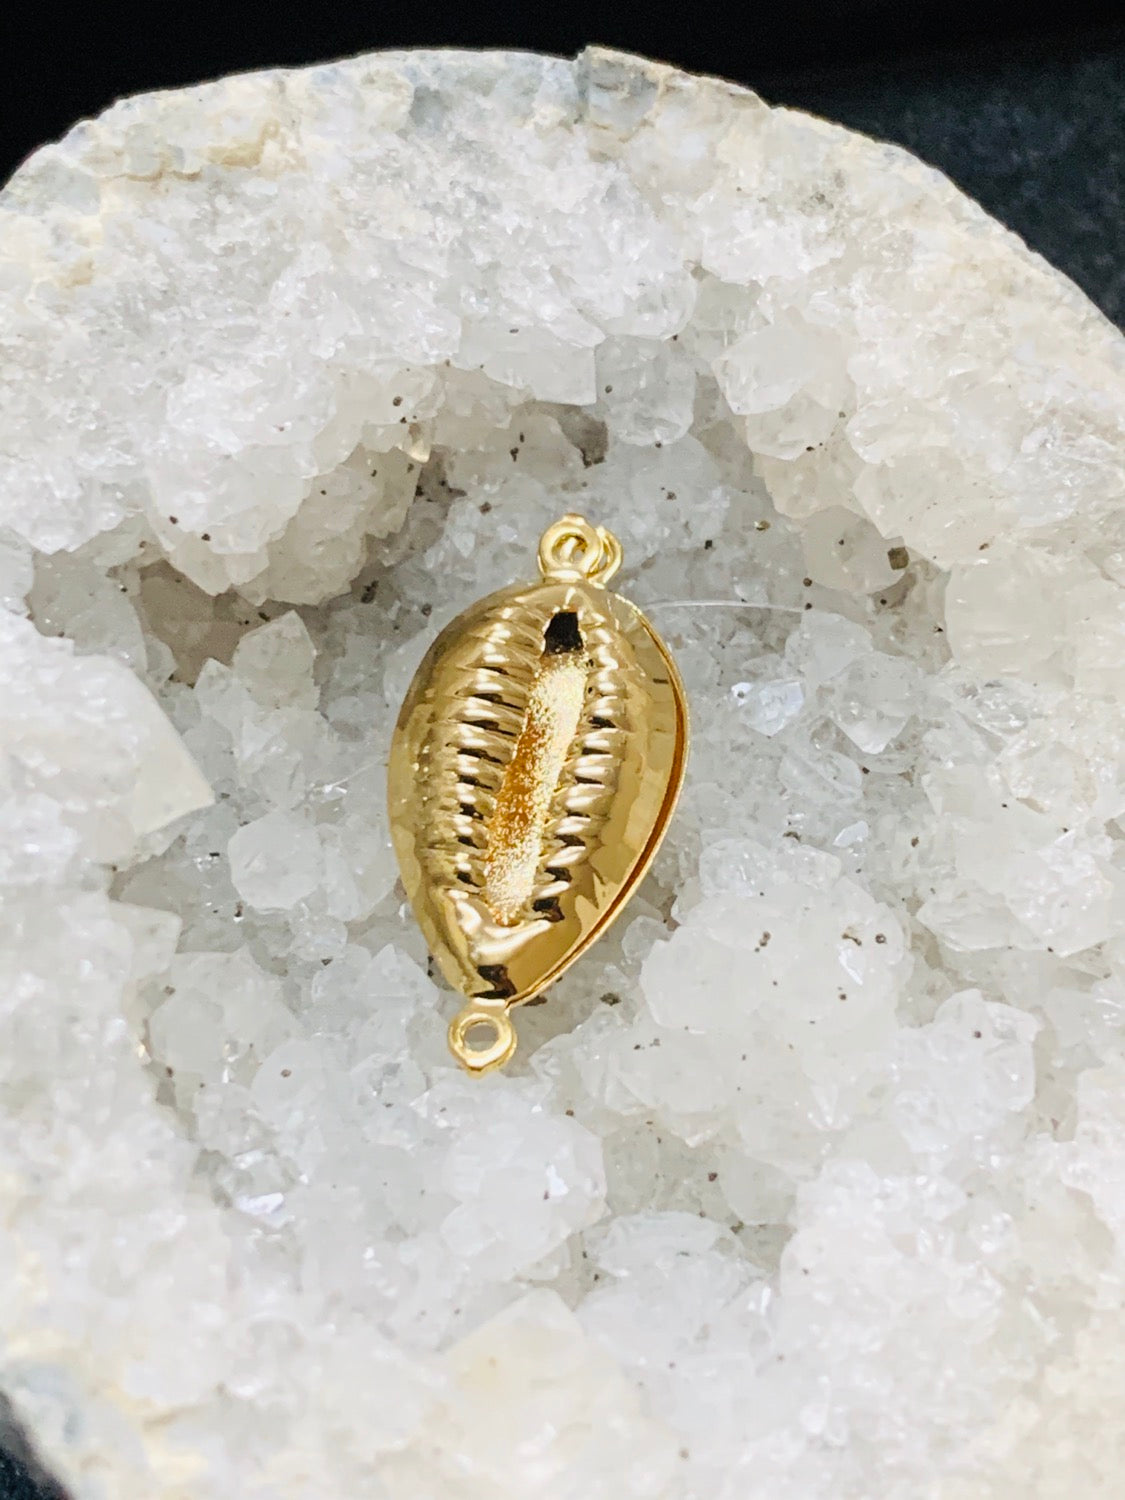 21mm gold filled cowrie / caracol 17869